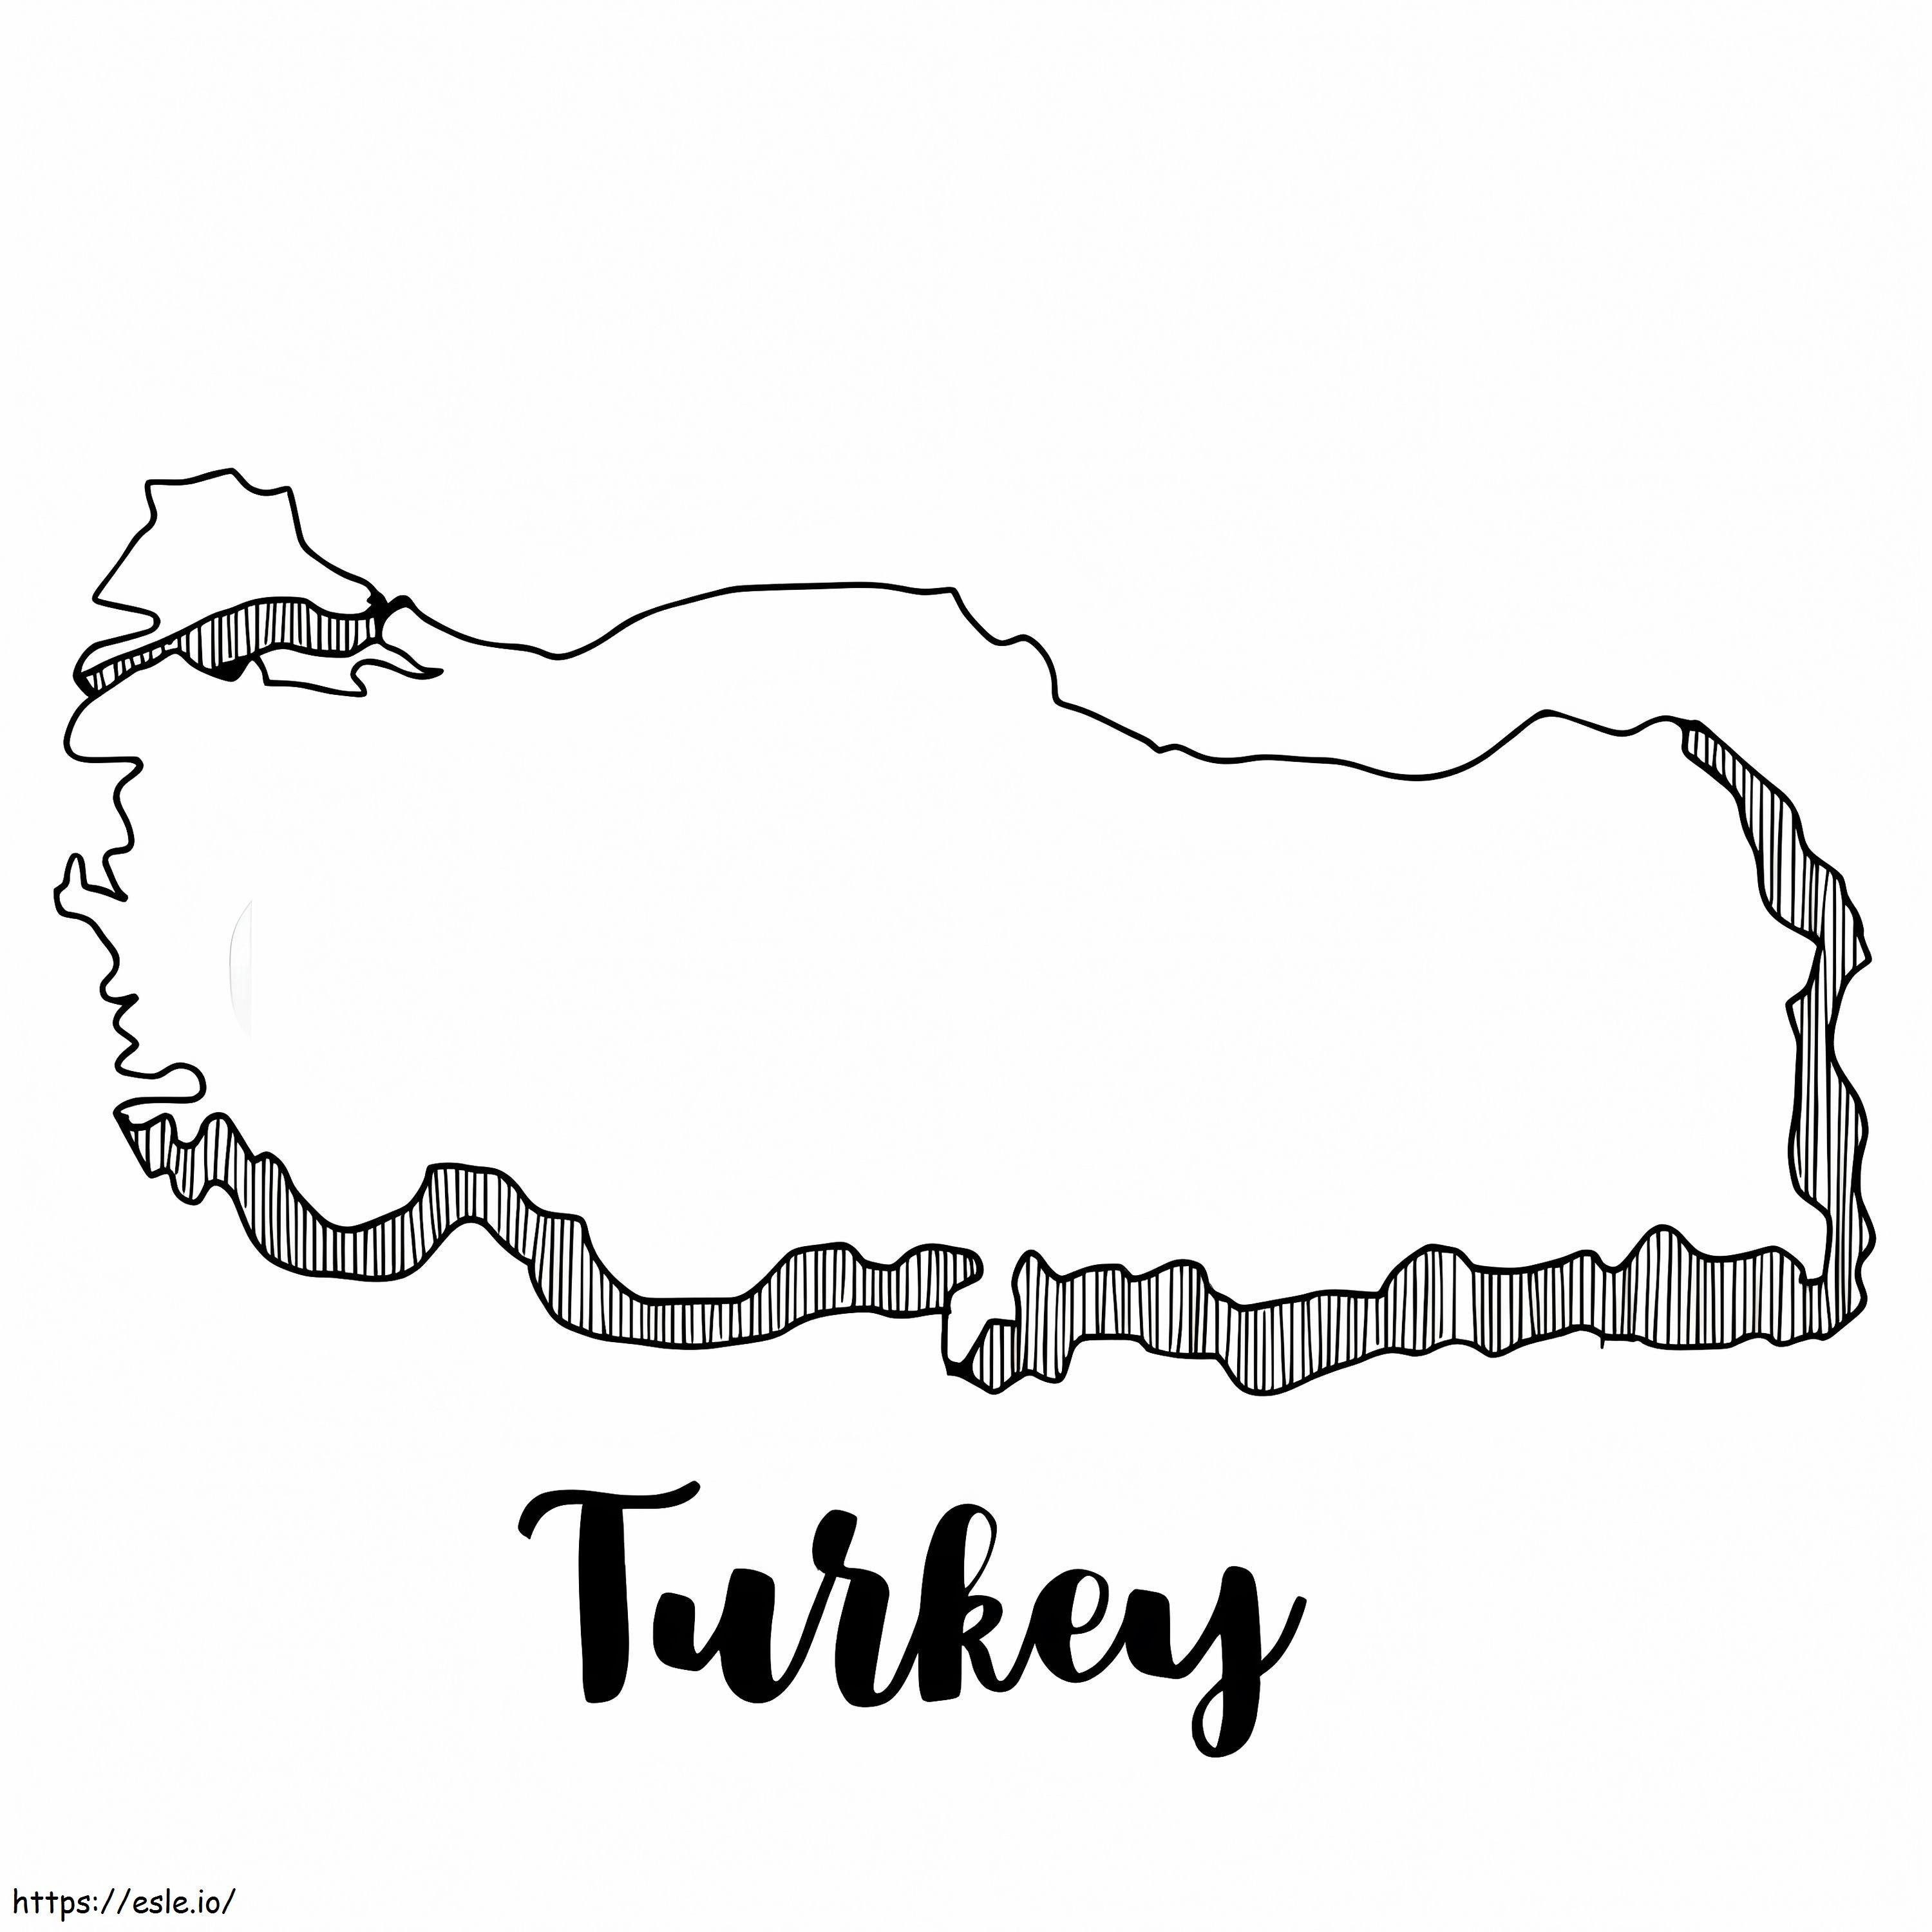 Turkeys Map coloring page